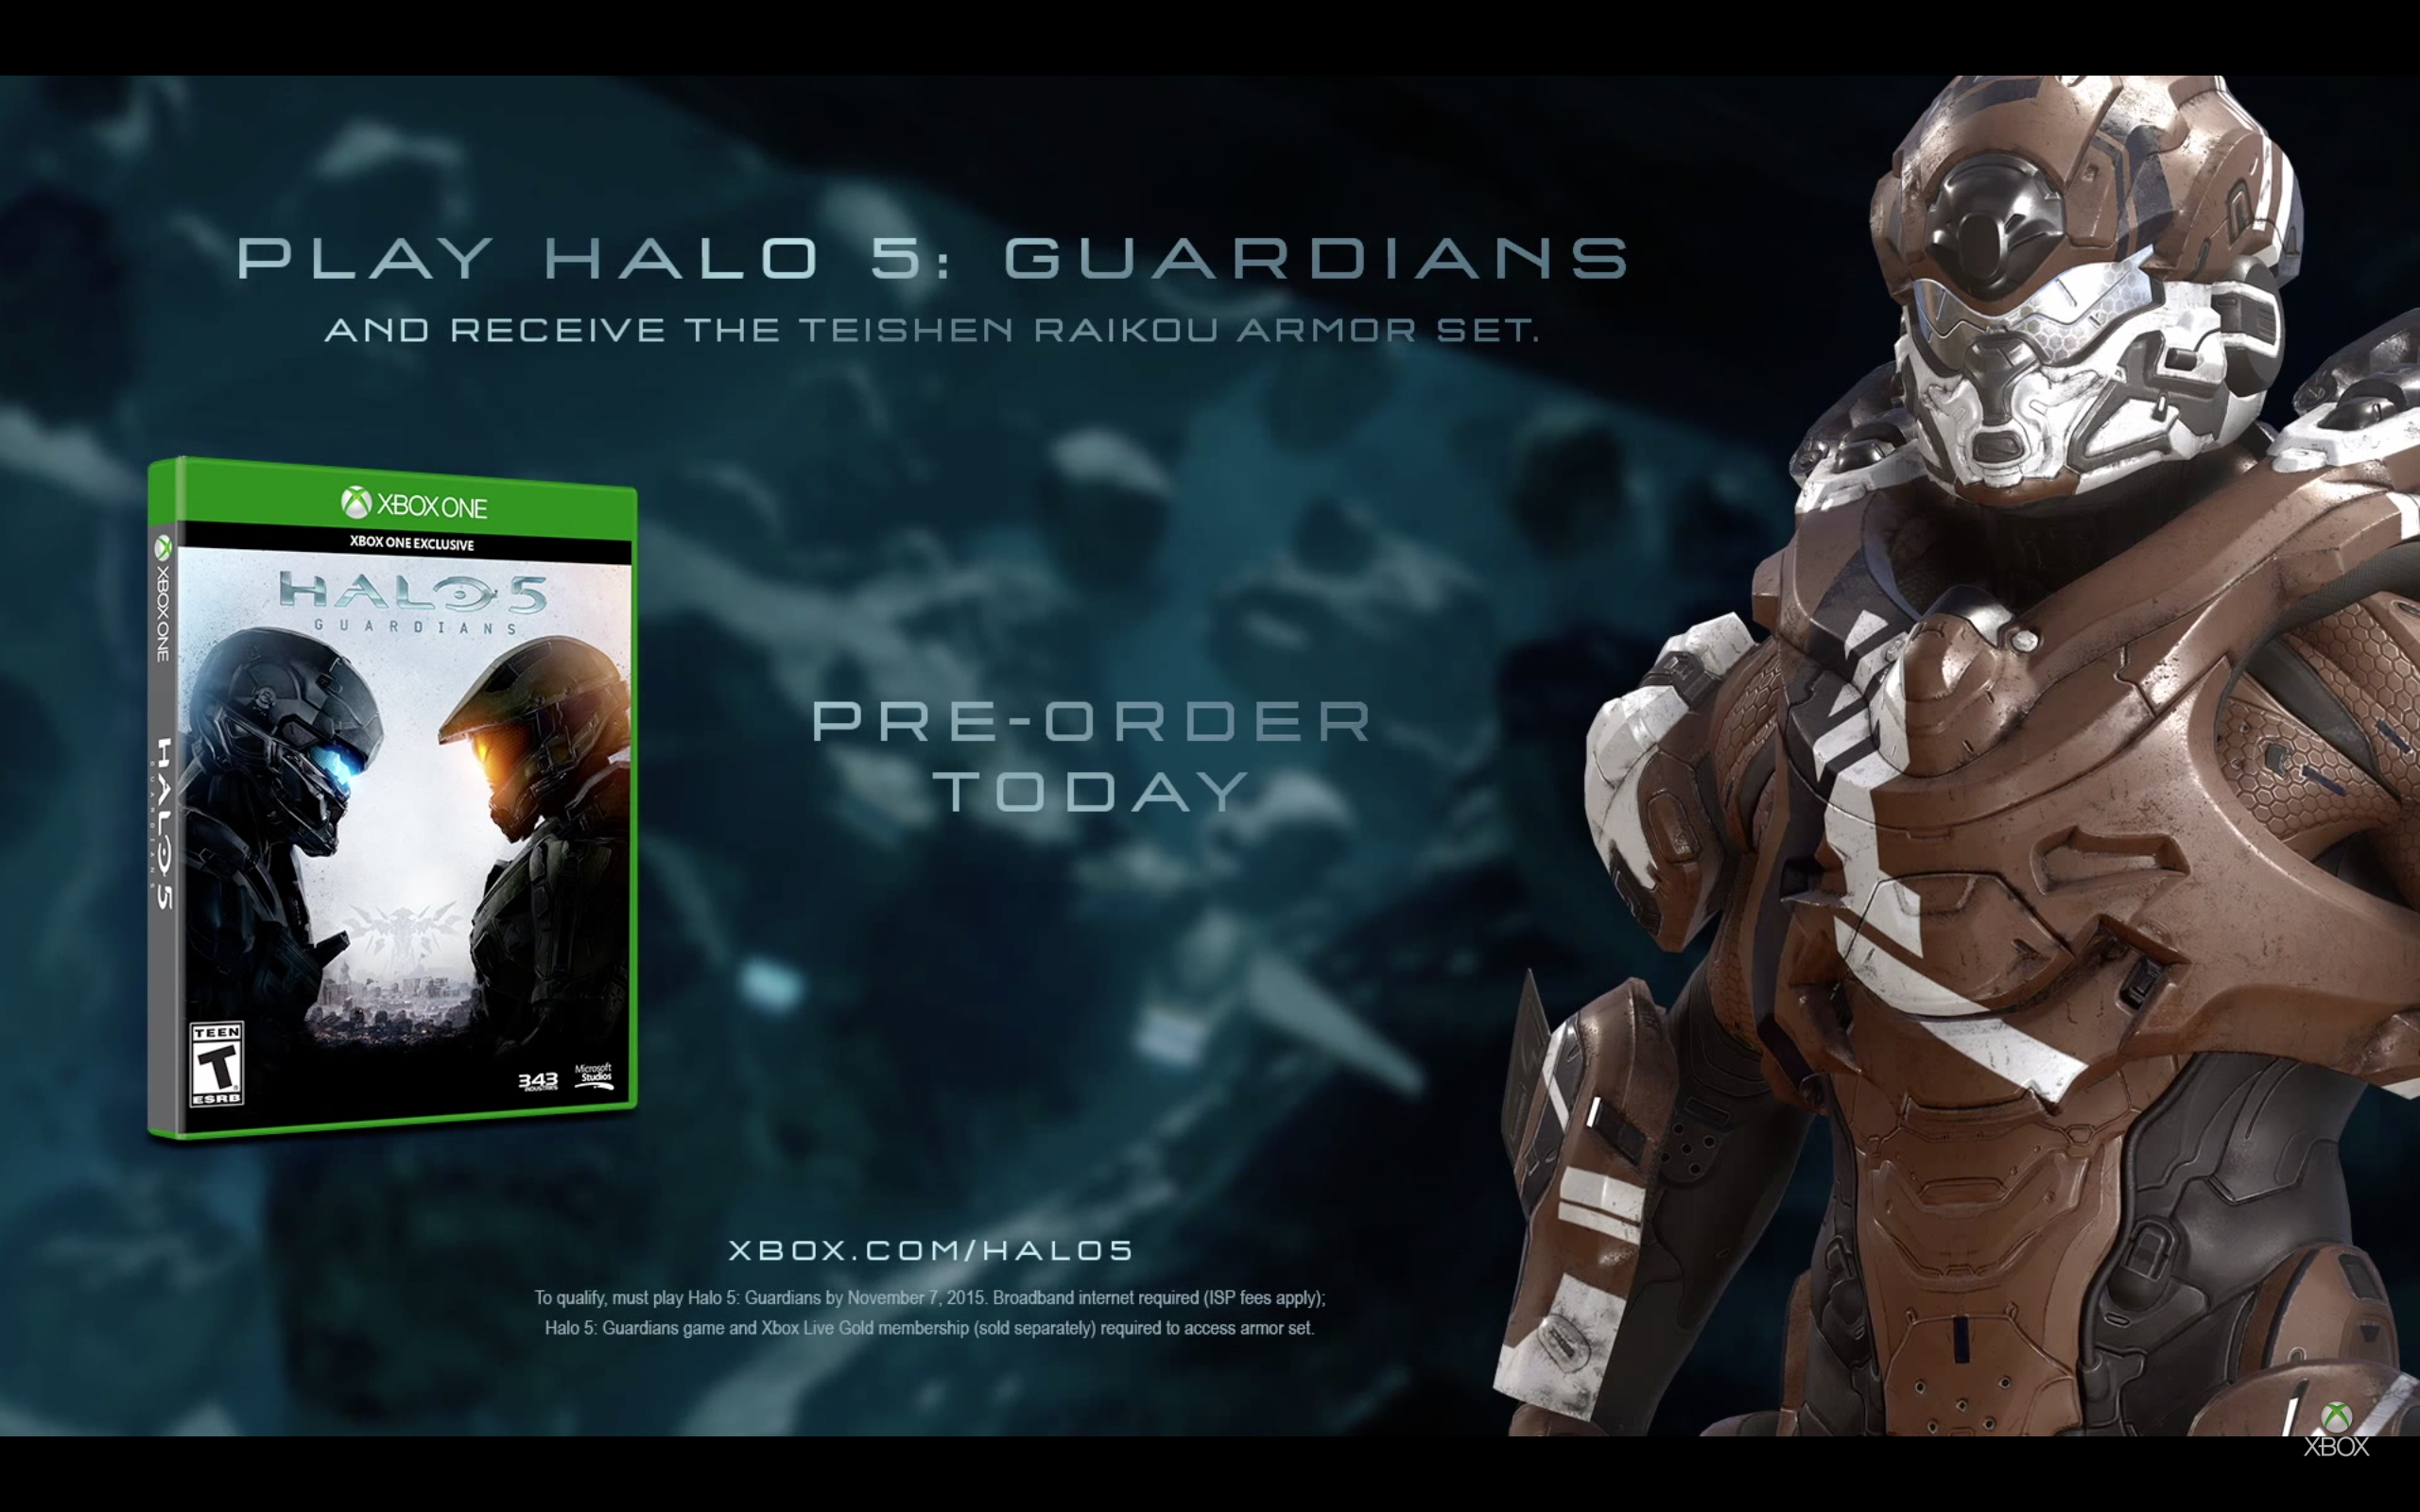 “Halo 5” Has Bonus Armor for Playing Early - Play Before Nov. 7 to Get It